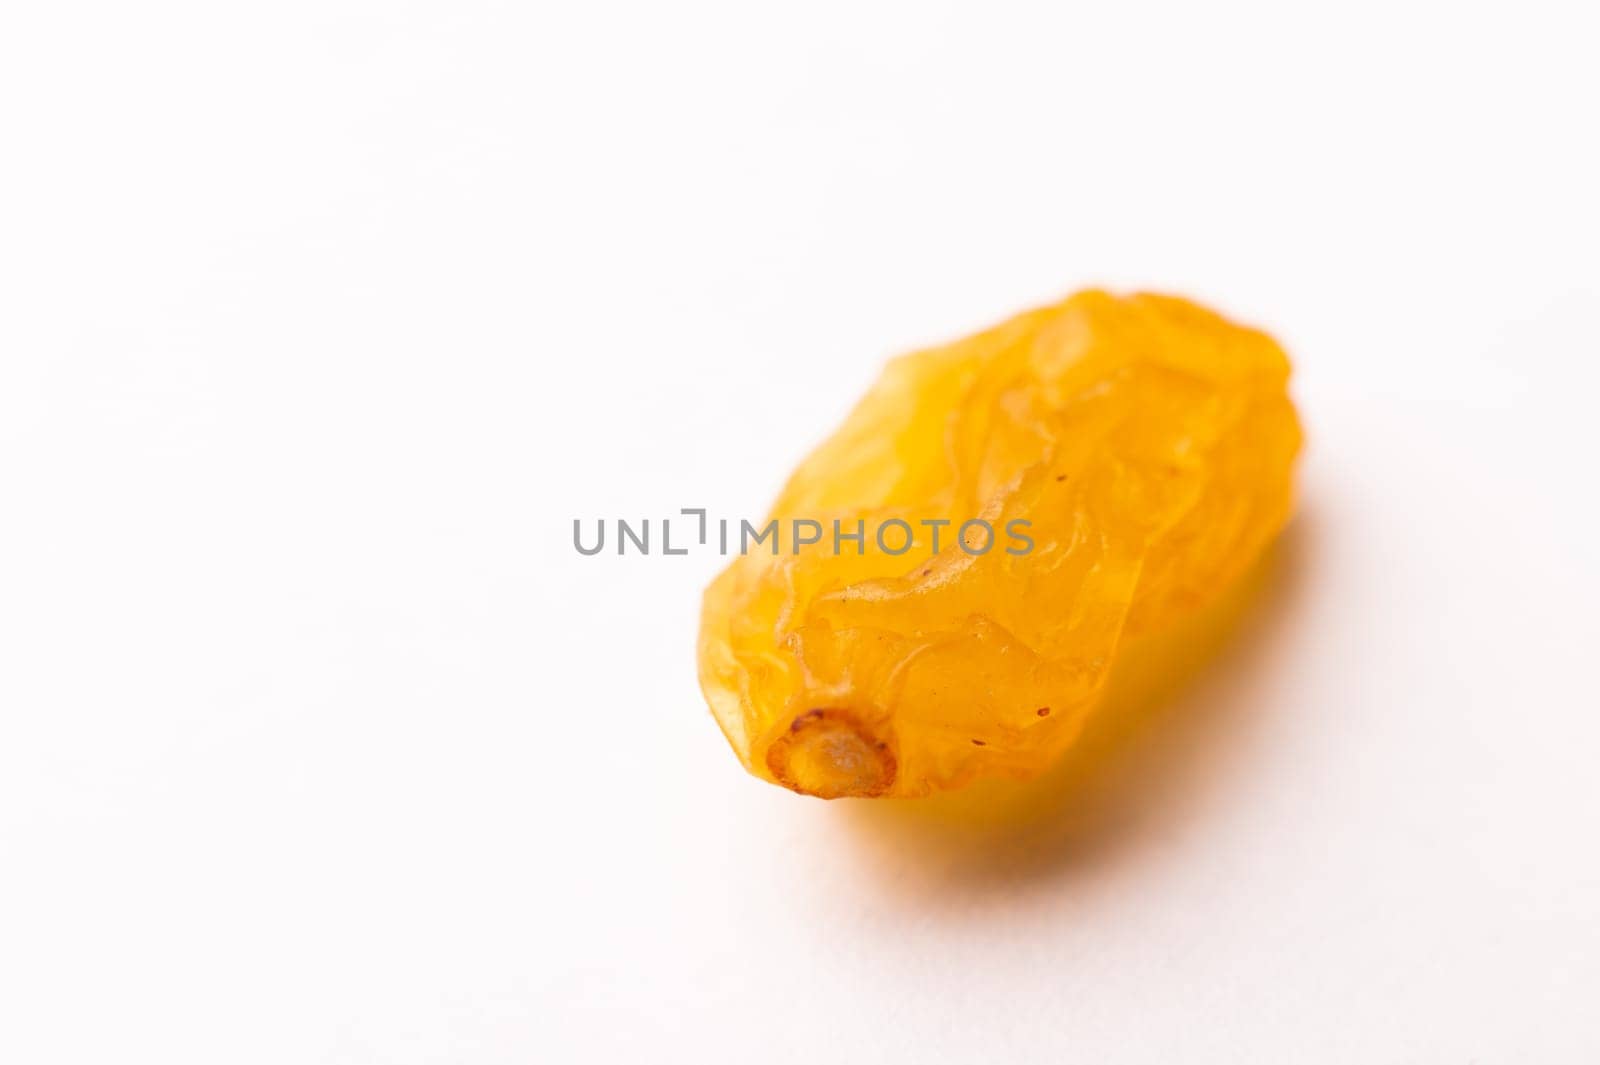 macro photograph of one raisin on a white background, side view by yanik88